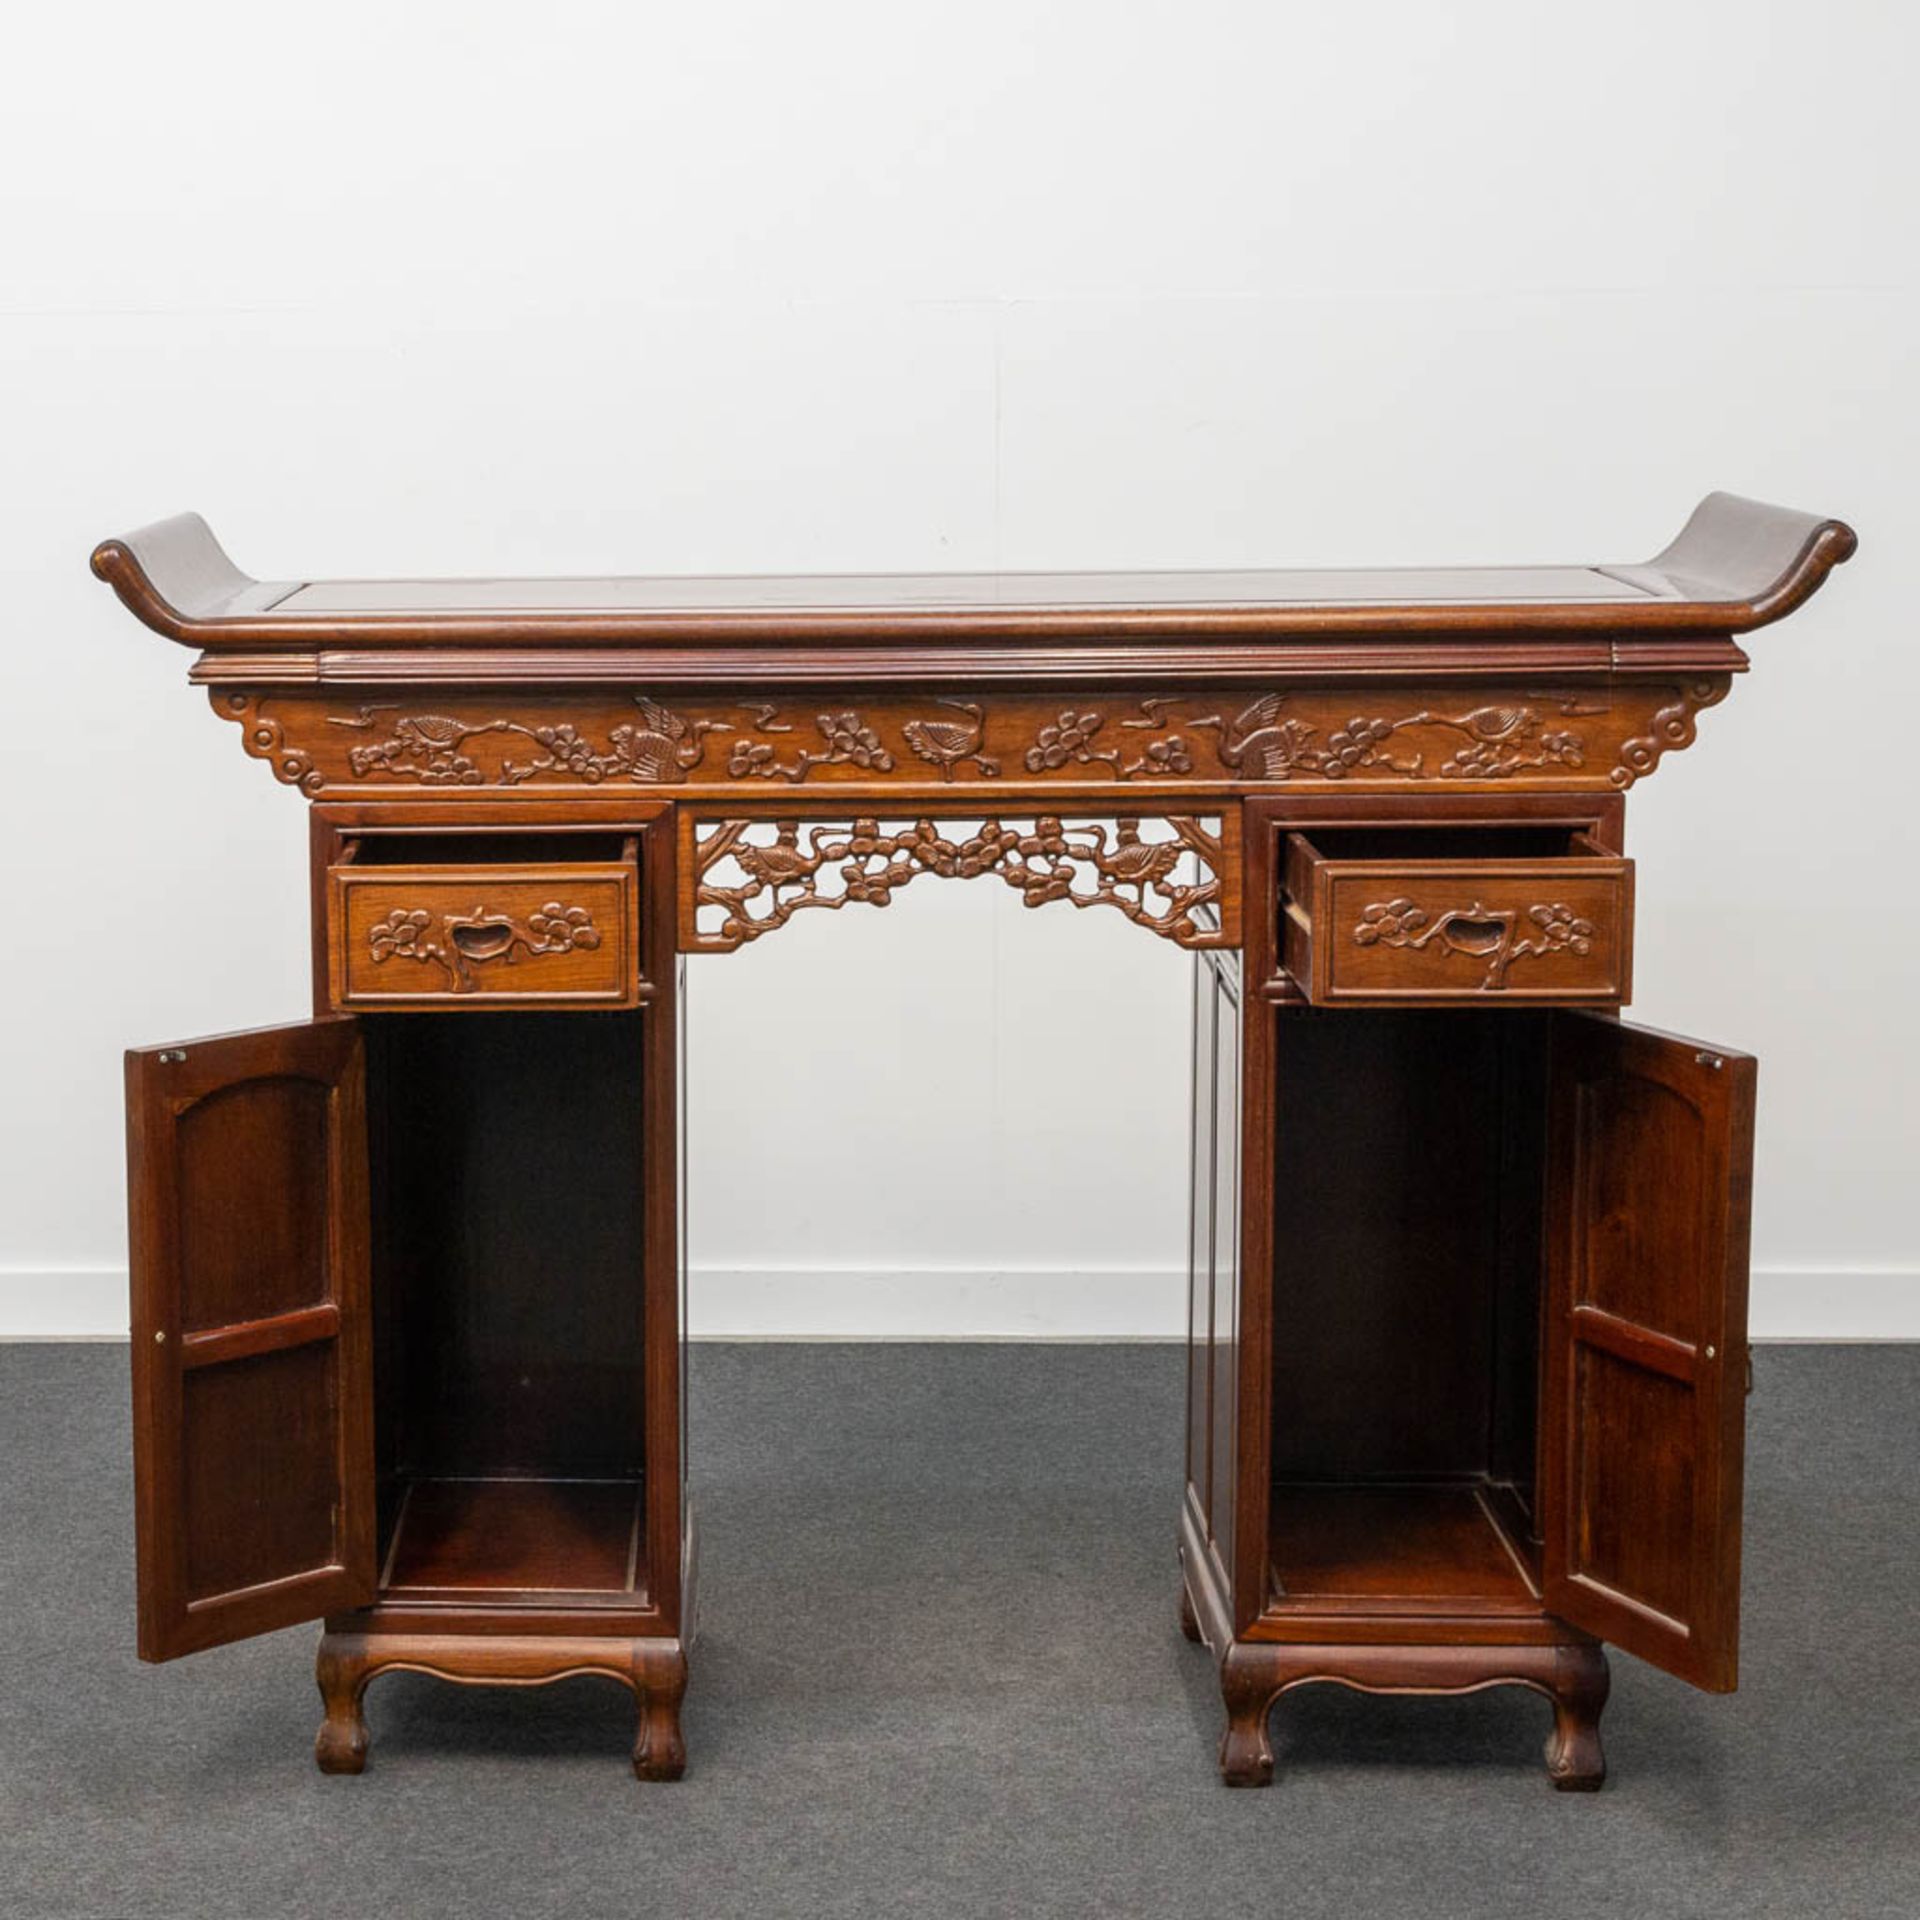 A Chinese hardwood Scroll Desk - Image 9 of 23